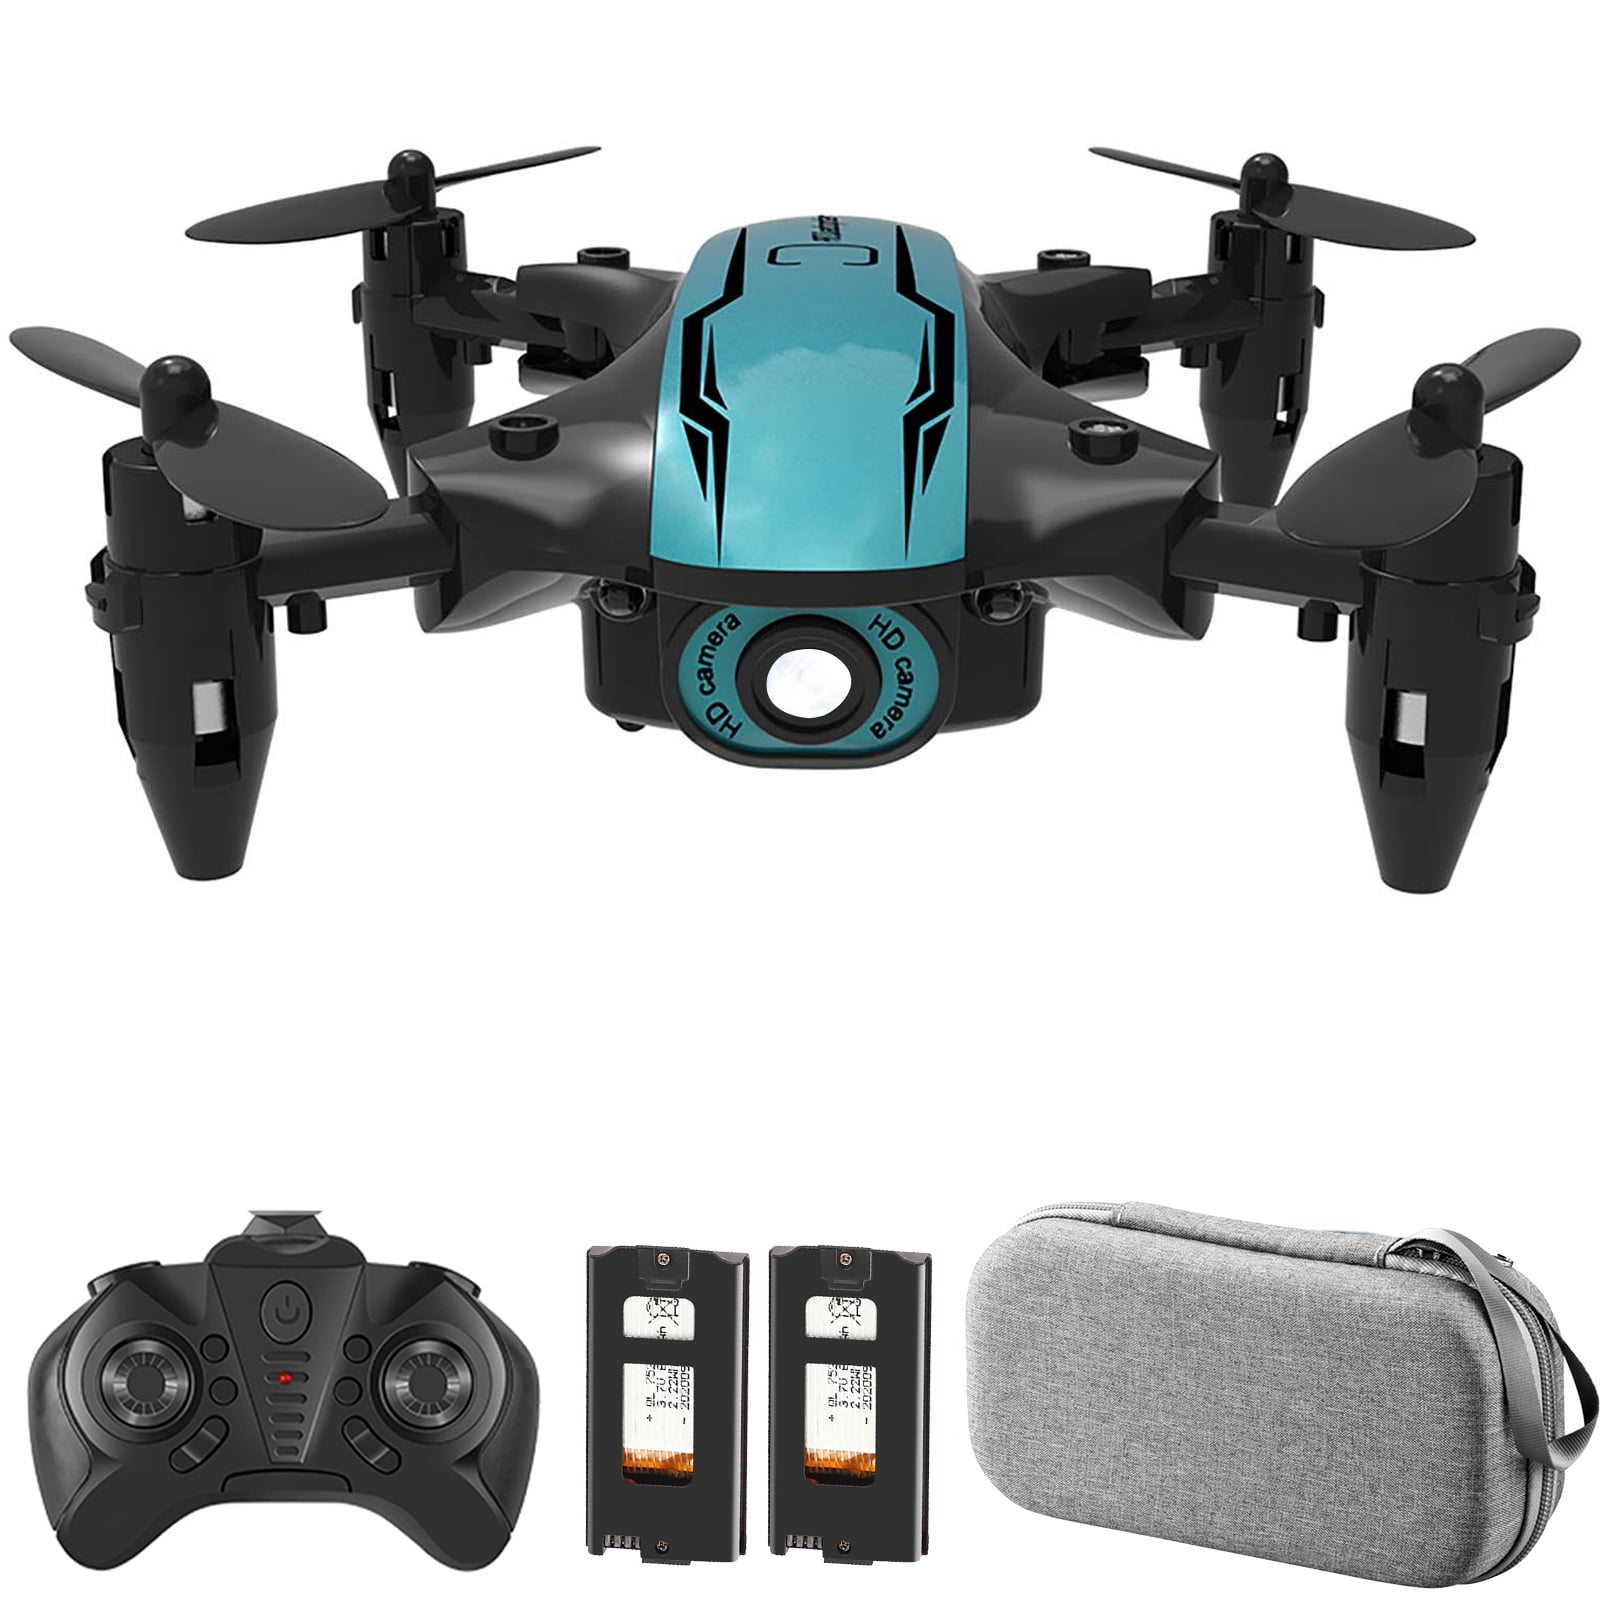 HASAKEE Q9s Drones for Kids,RC Drone with Altitude Hold and Headless with Full 